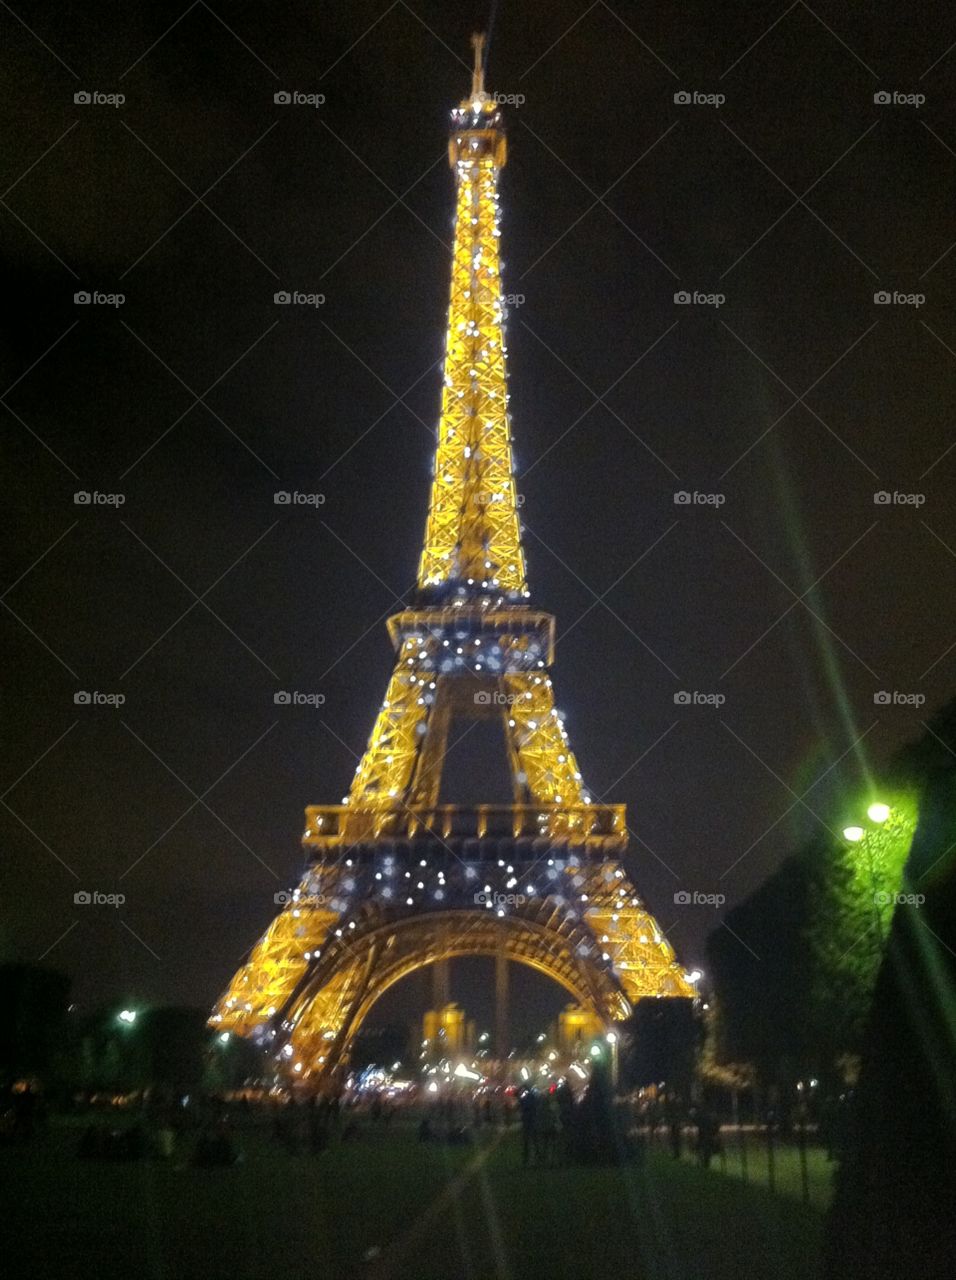 The Eiffel Tower. The Eiffel Tower at night